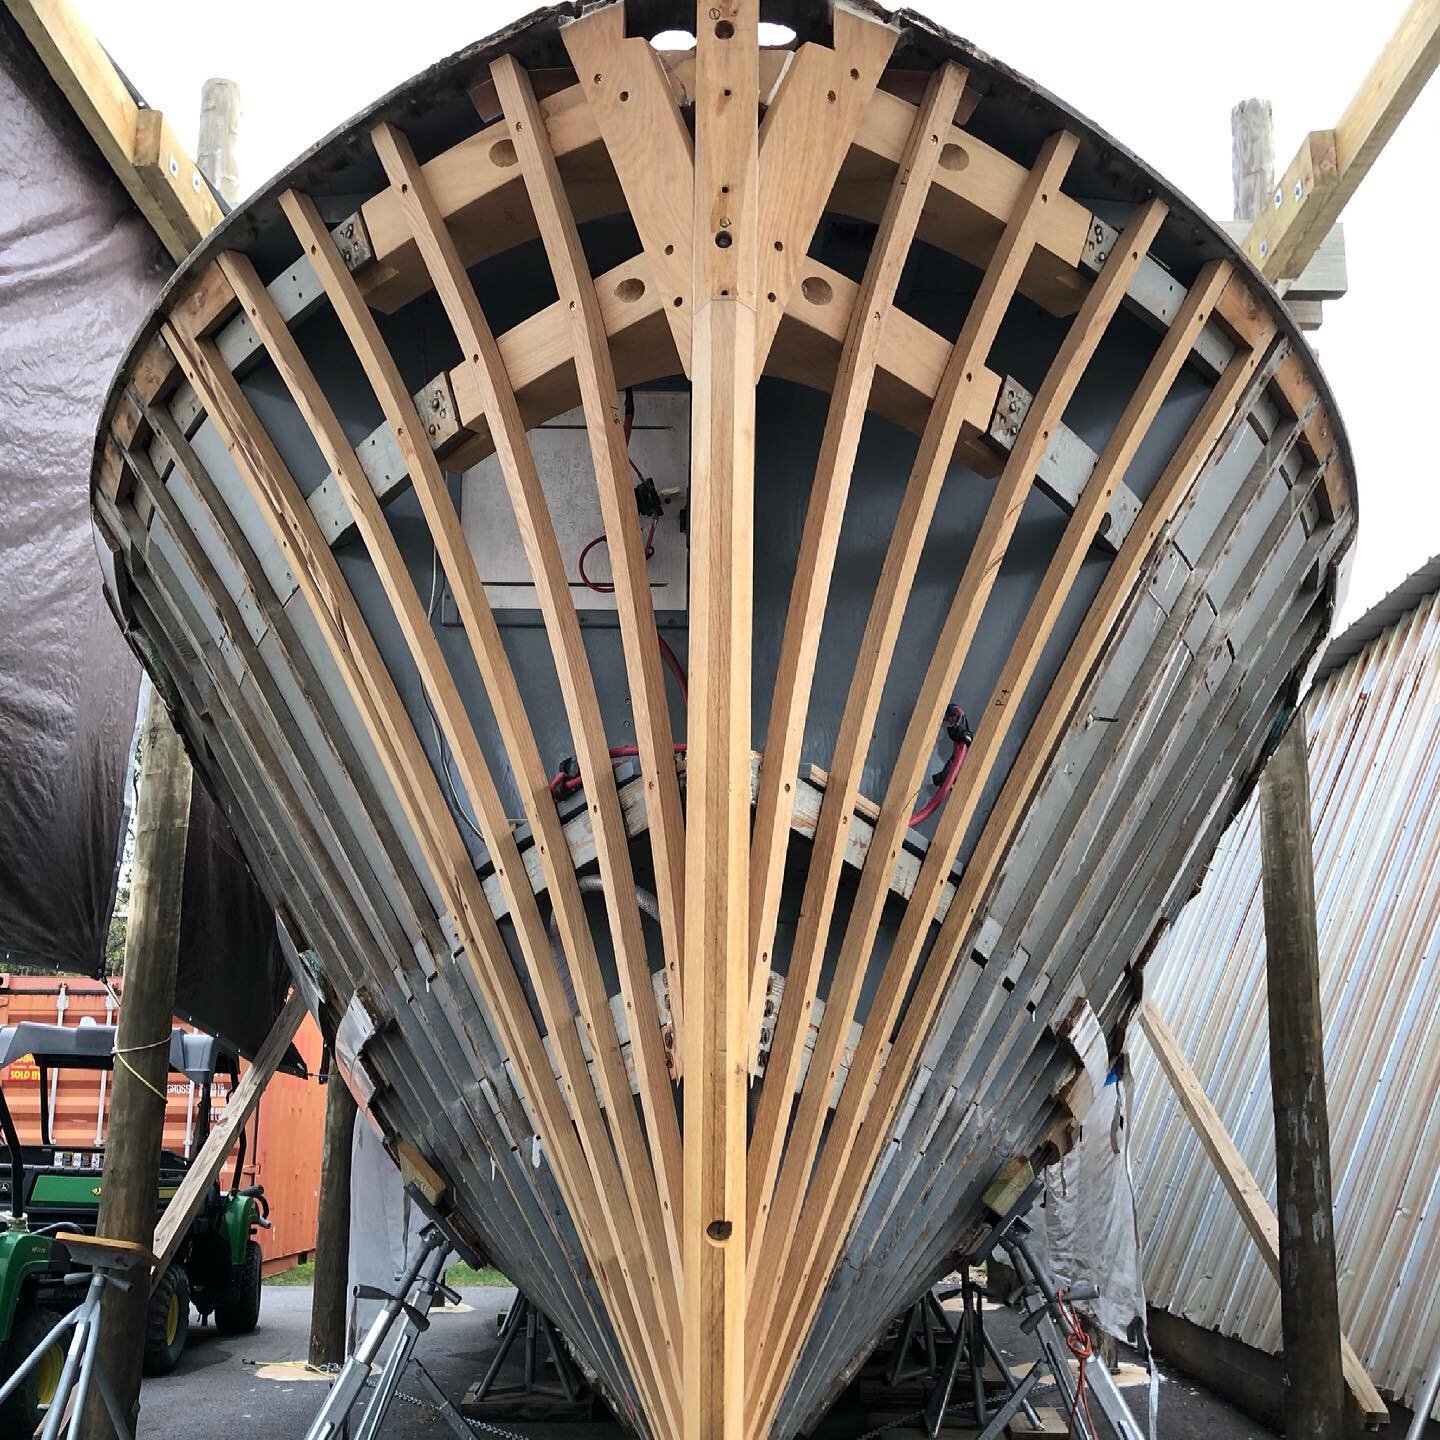 New forward section framed. New planks on the way...#remanufacturing #boatbuilding #boatbuildinglife #vintage #classicboat #mathewsboat #1946 #acbs #whiteoak #ribs #framing #woodenboats #restoration #stem #shipwrights #loveourjob #urbanboatshop #down